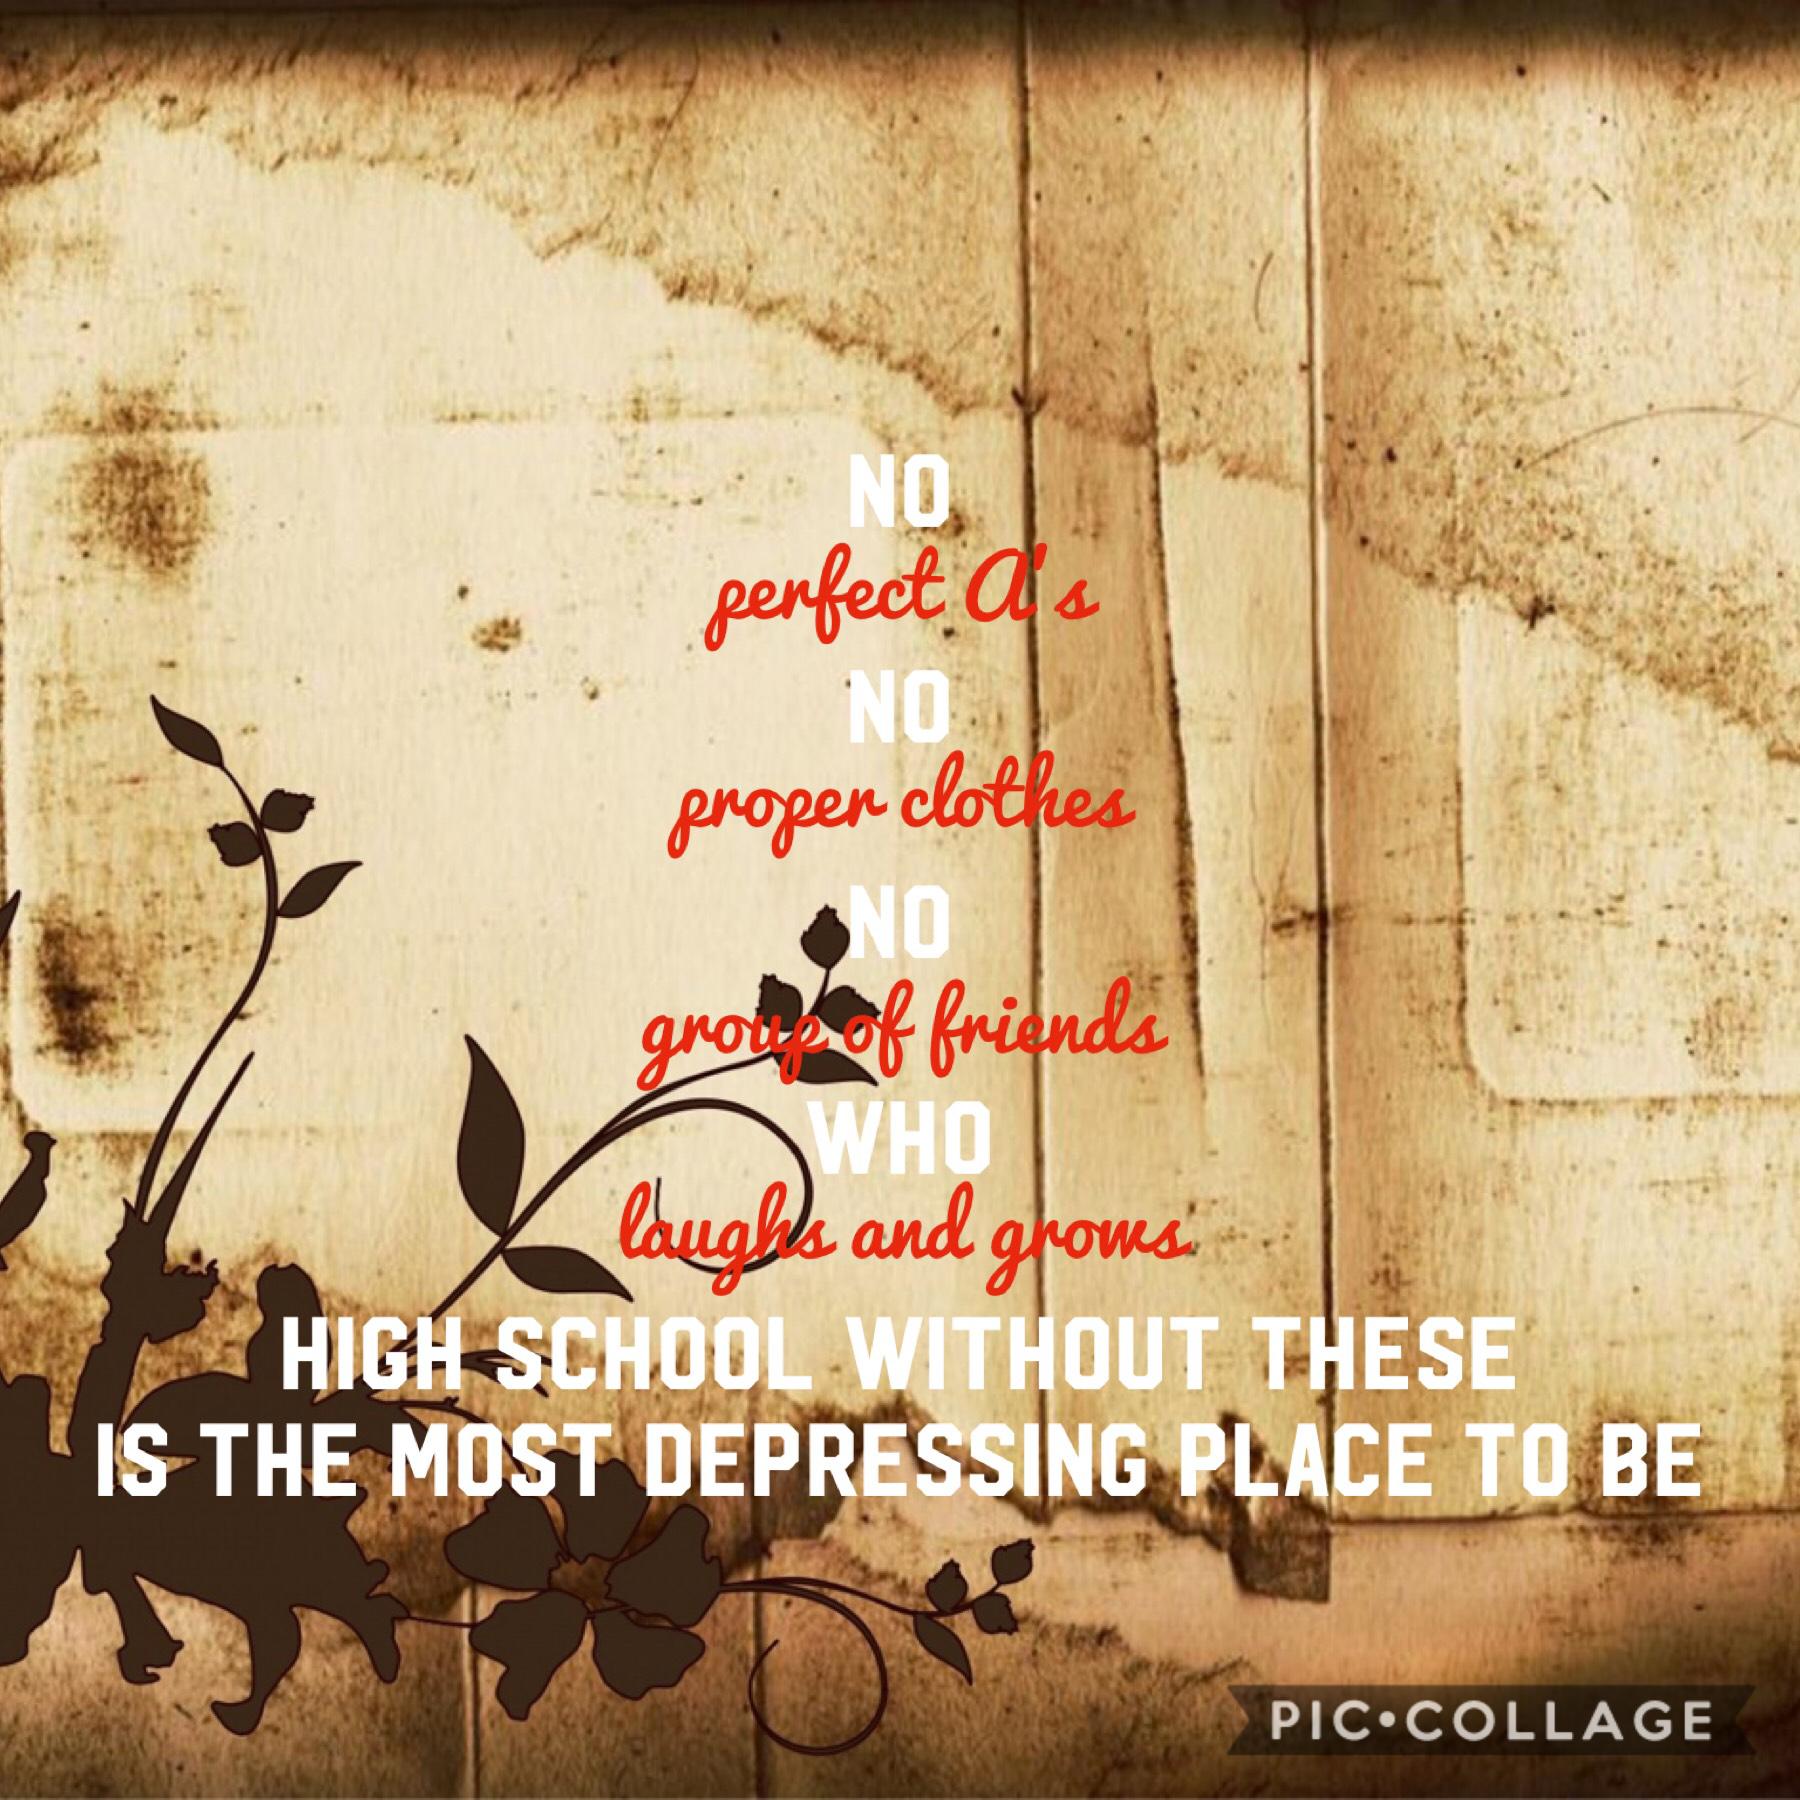 ‘High School is Depressing’
I know that this is the same poem as another post  it I wanted to try something new. I’m not sure how it looks but let me know!